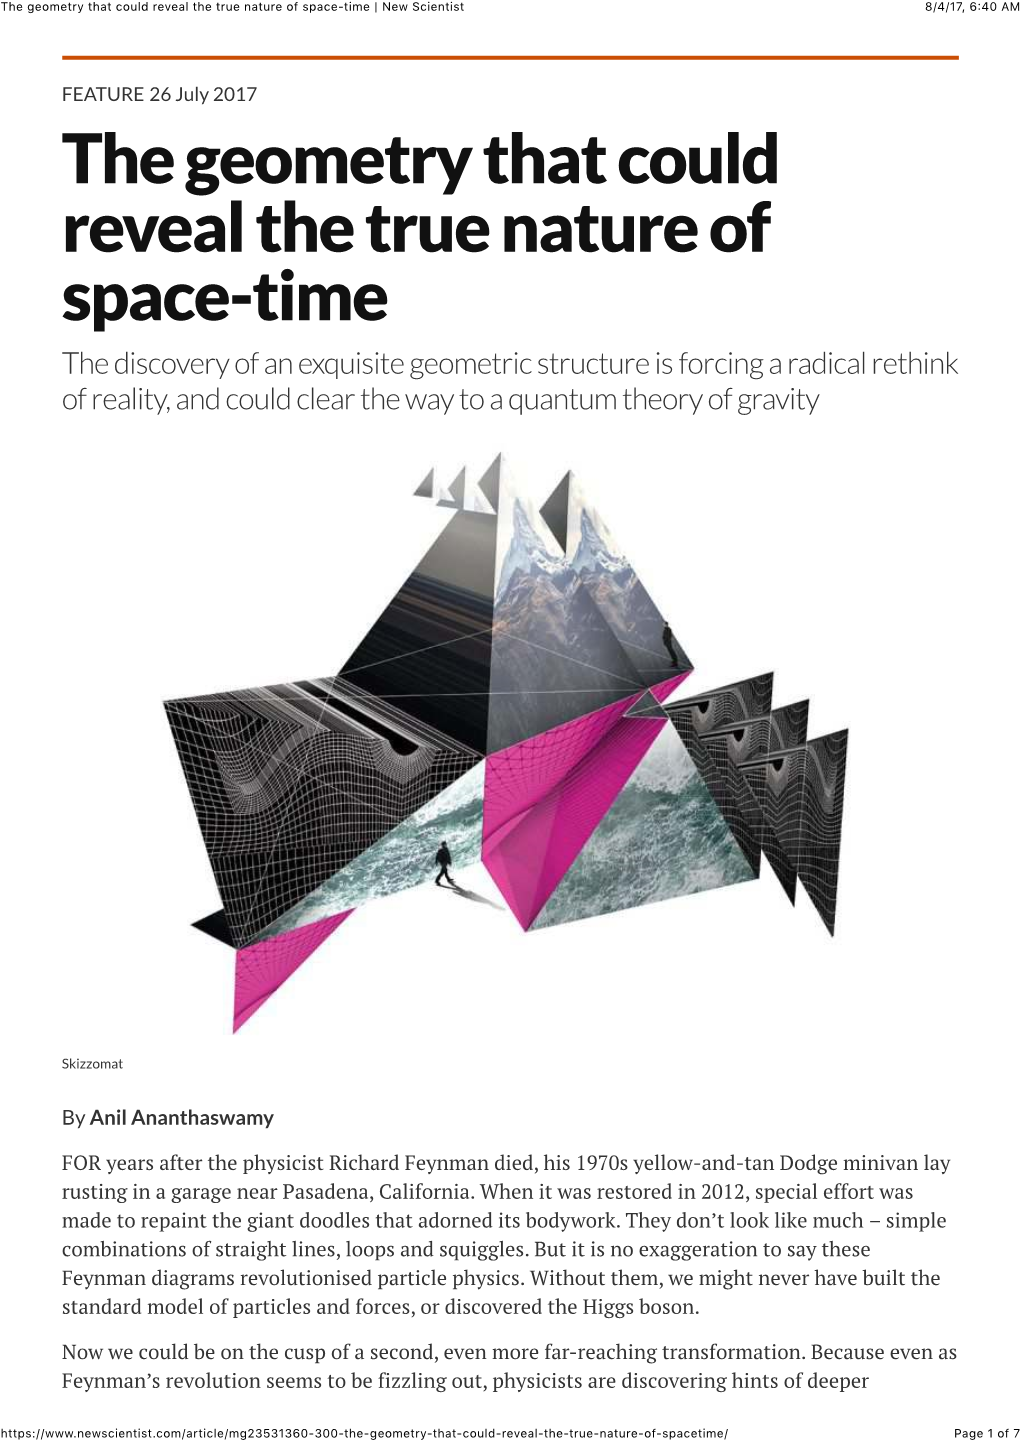 The Geometry That Could Reveal the True Nature of Space-Time | New Scientist 8/4/17, 6:40 AM